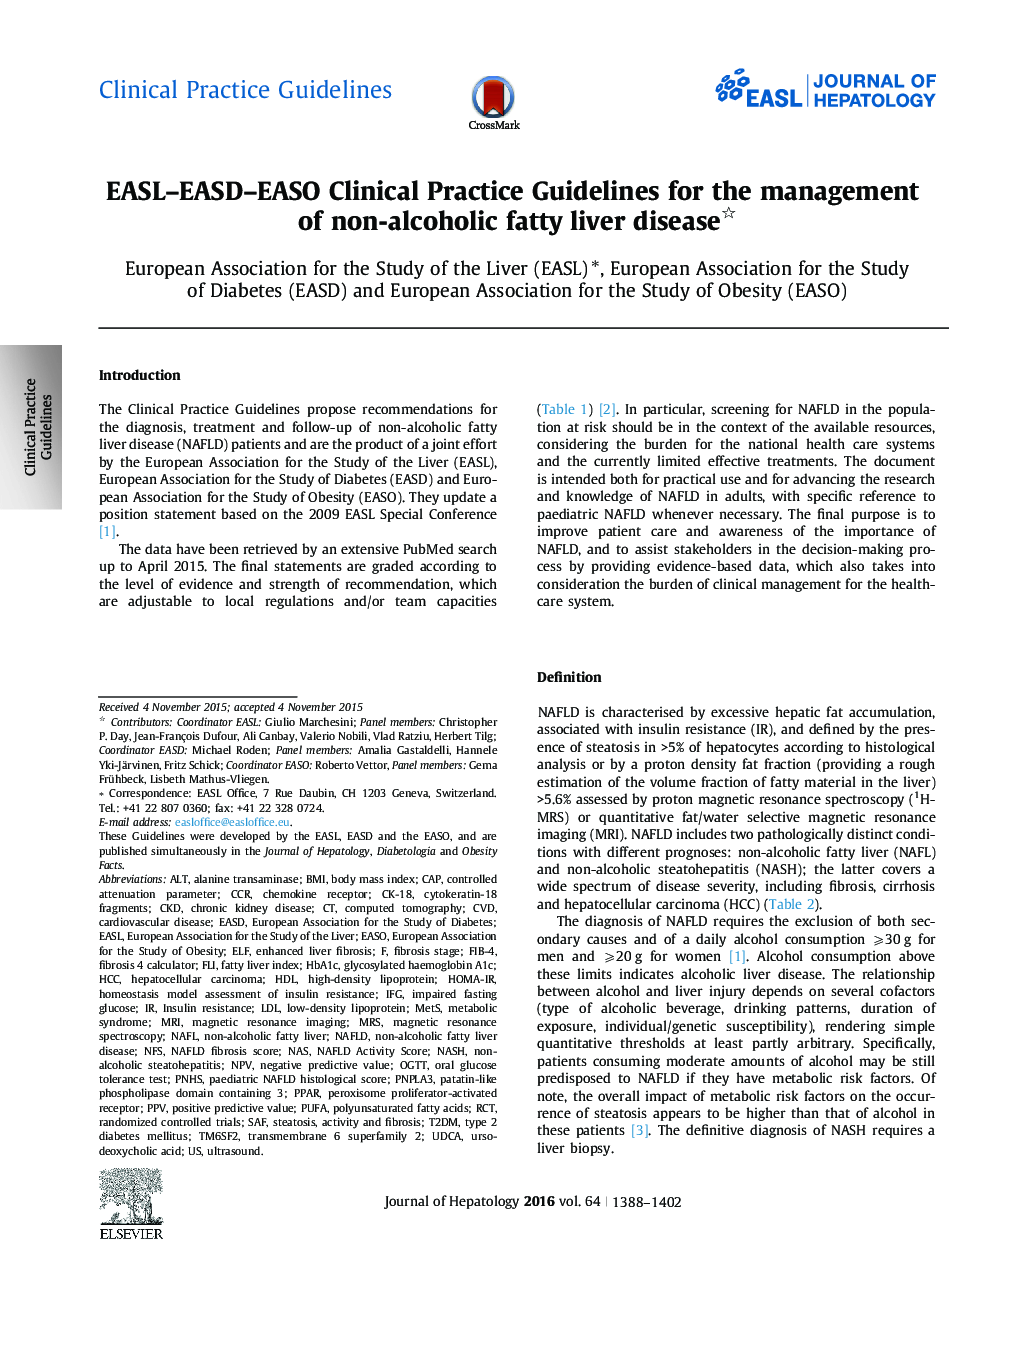 EASL-EASD-EASO Clinical Practice Guidelines for the management of non-alcoholic fatty liver disease